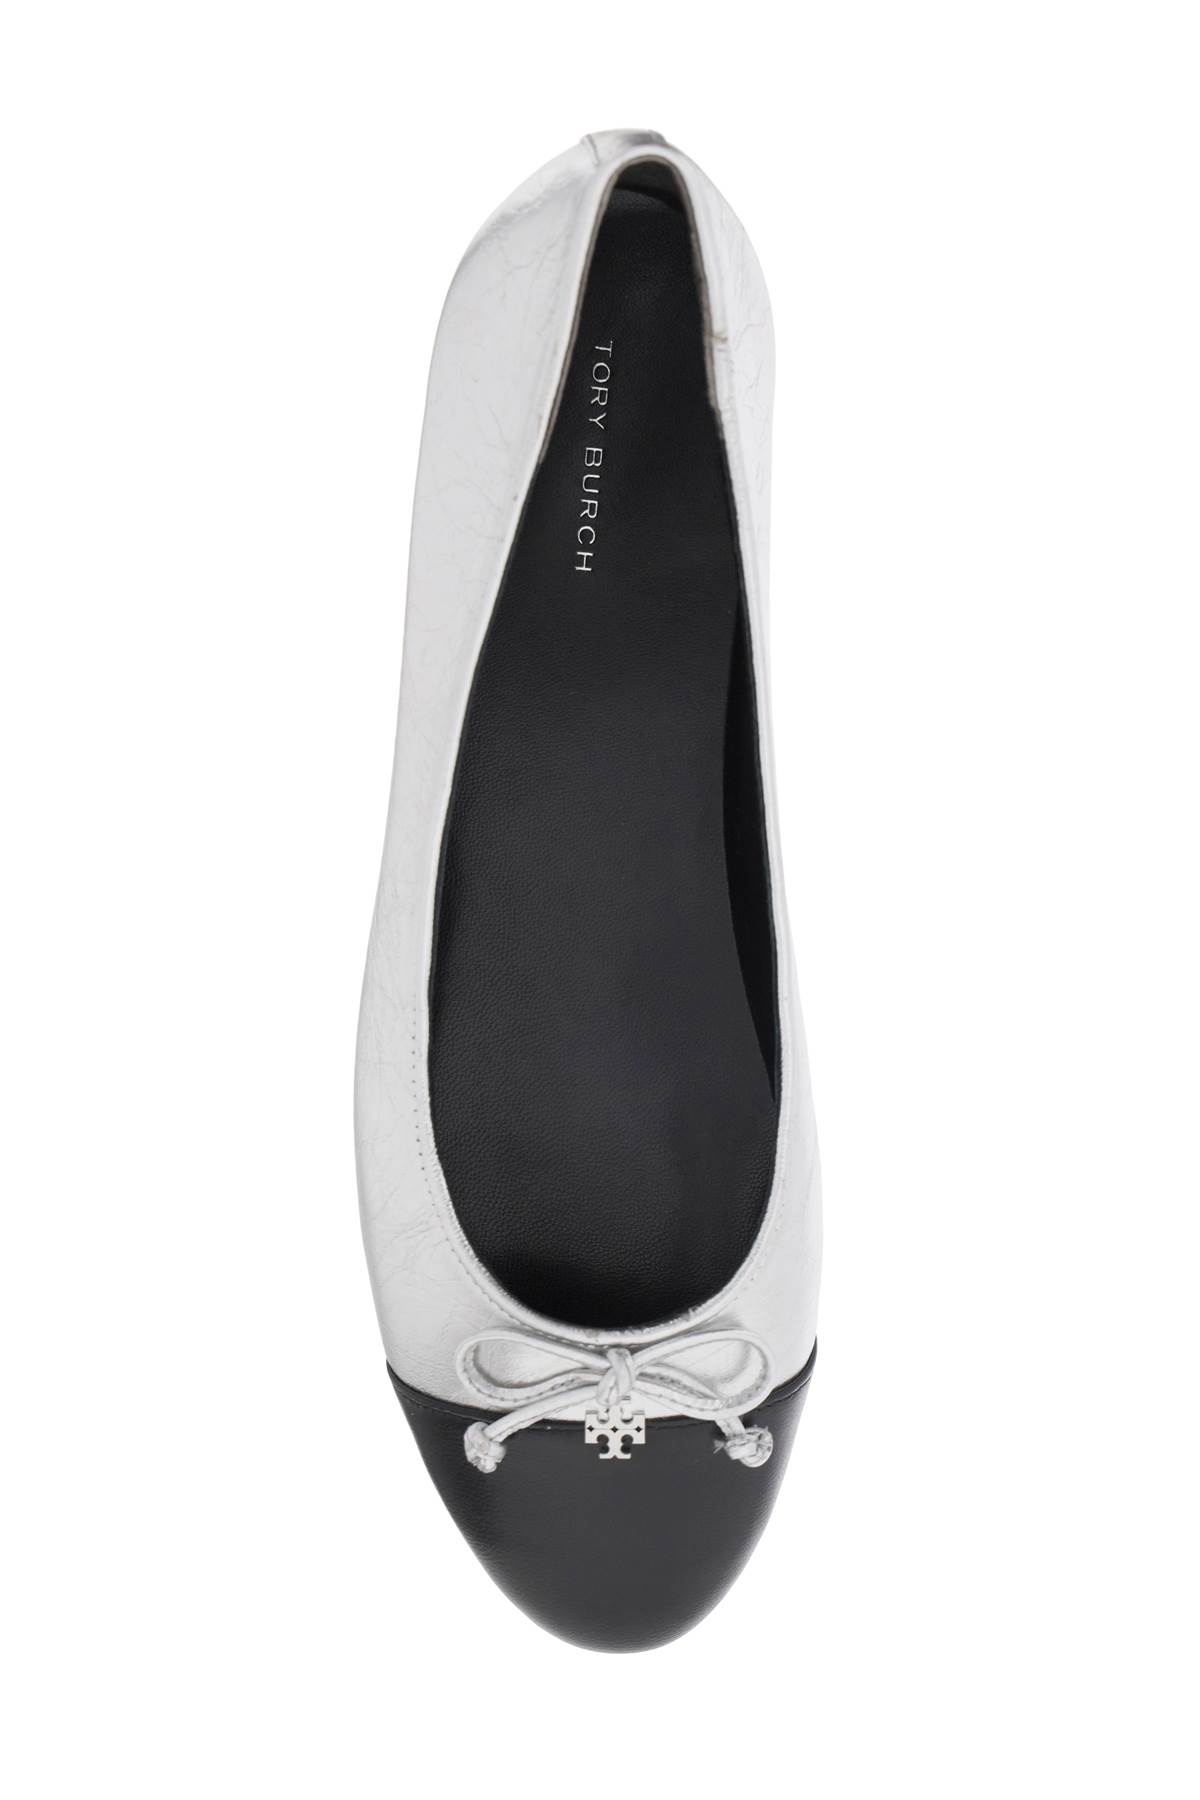 Shop Tory Burch Laminated Ballet Flats With Contrasting Toe Flat Shoes In Silver